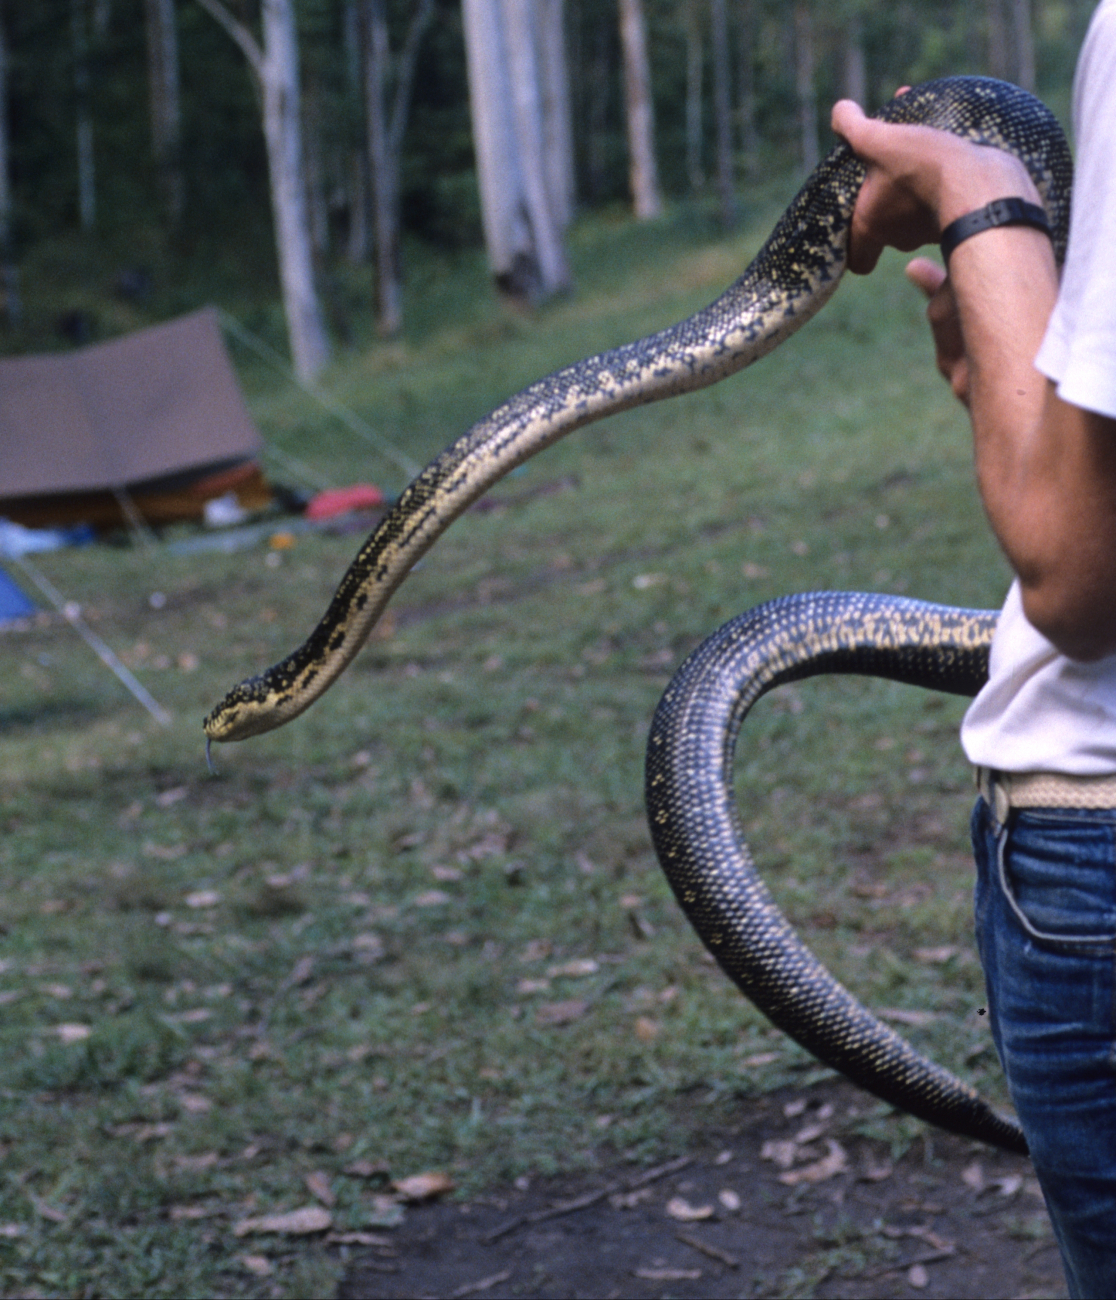 A large constricting snake